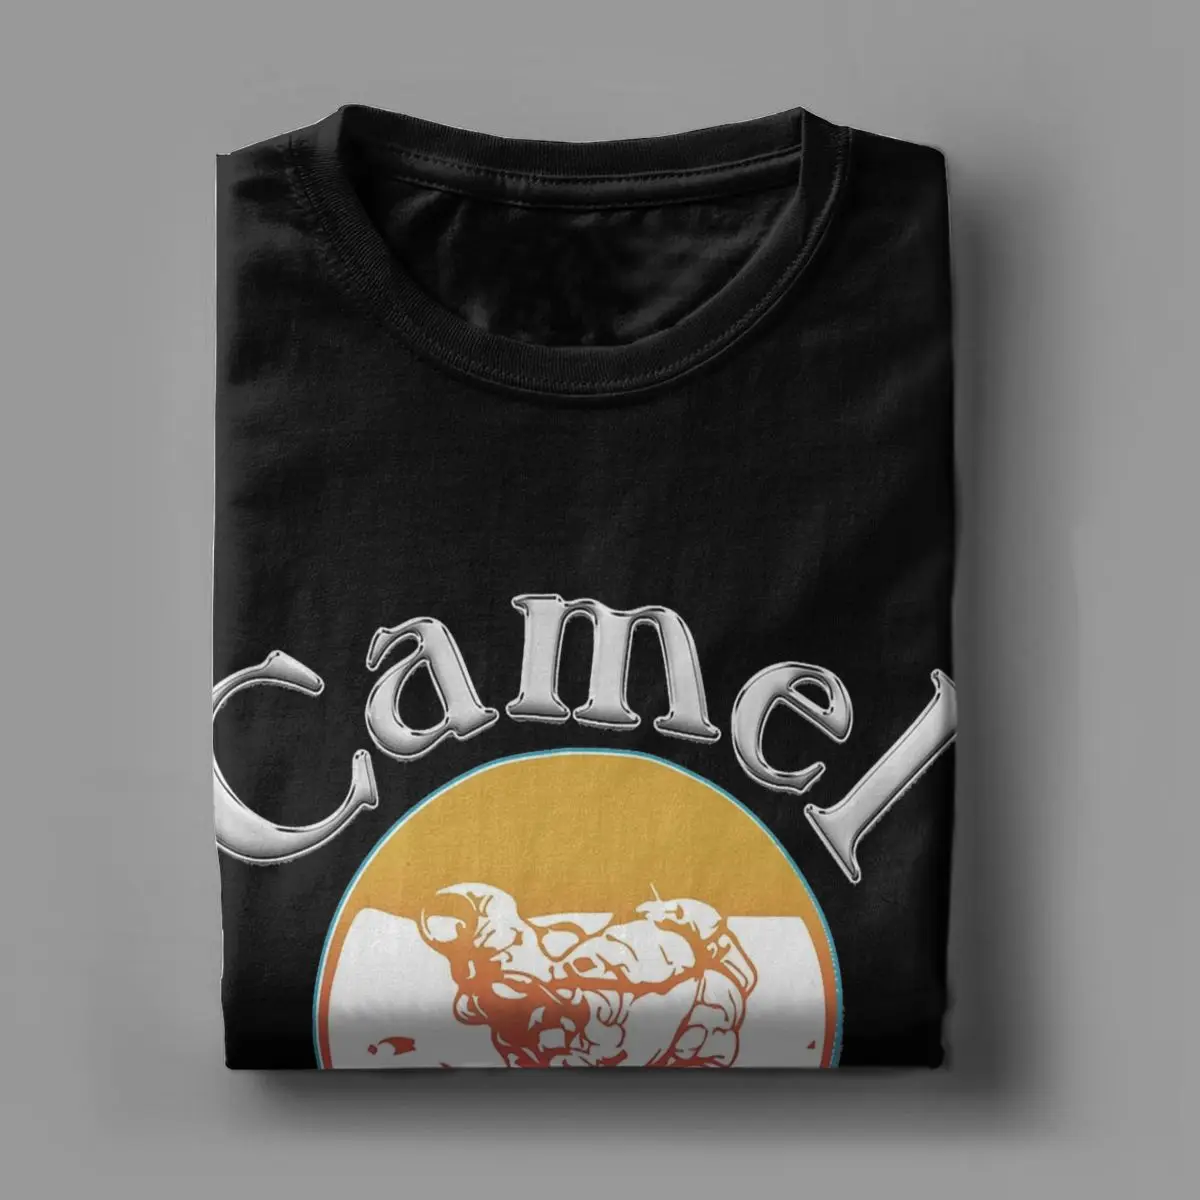 CAMELS BAND Mirage Cigarettes Music Progressive T Shirt for Men  Cotton Casual T-Shirts Round Collar Tee Shirt Short Sleeve Tops